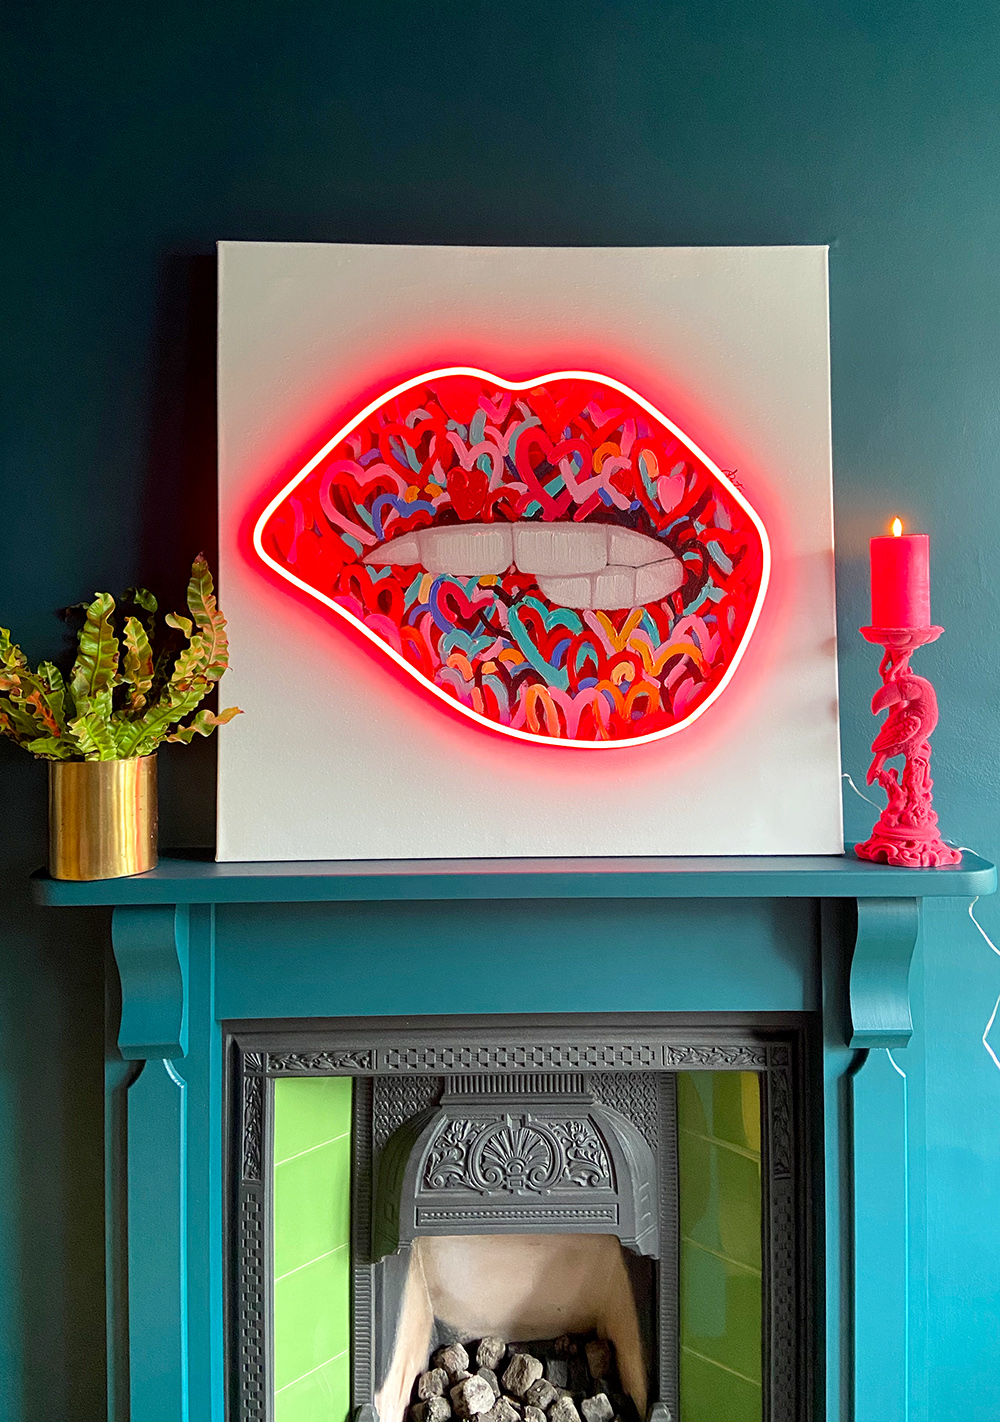 Statement artwork - red lips canvas with red neon lights